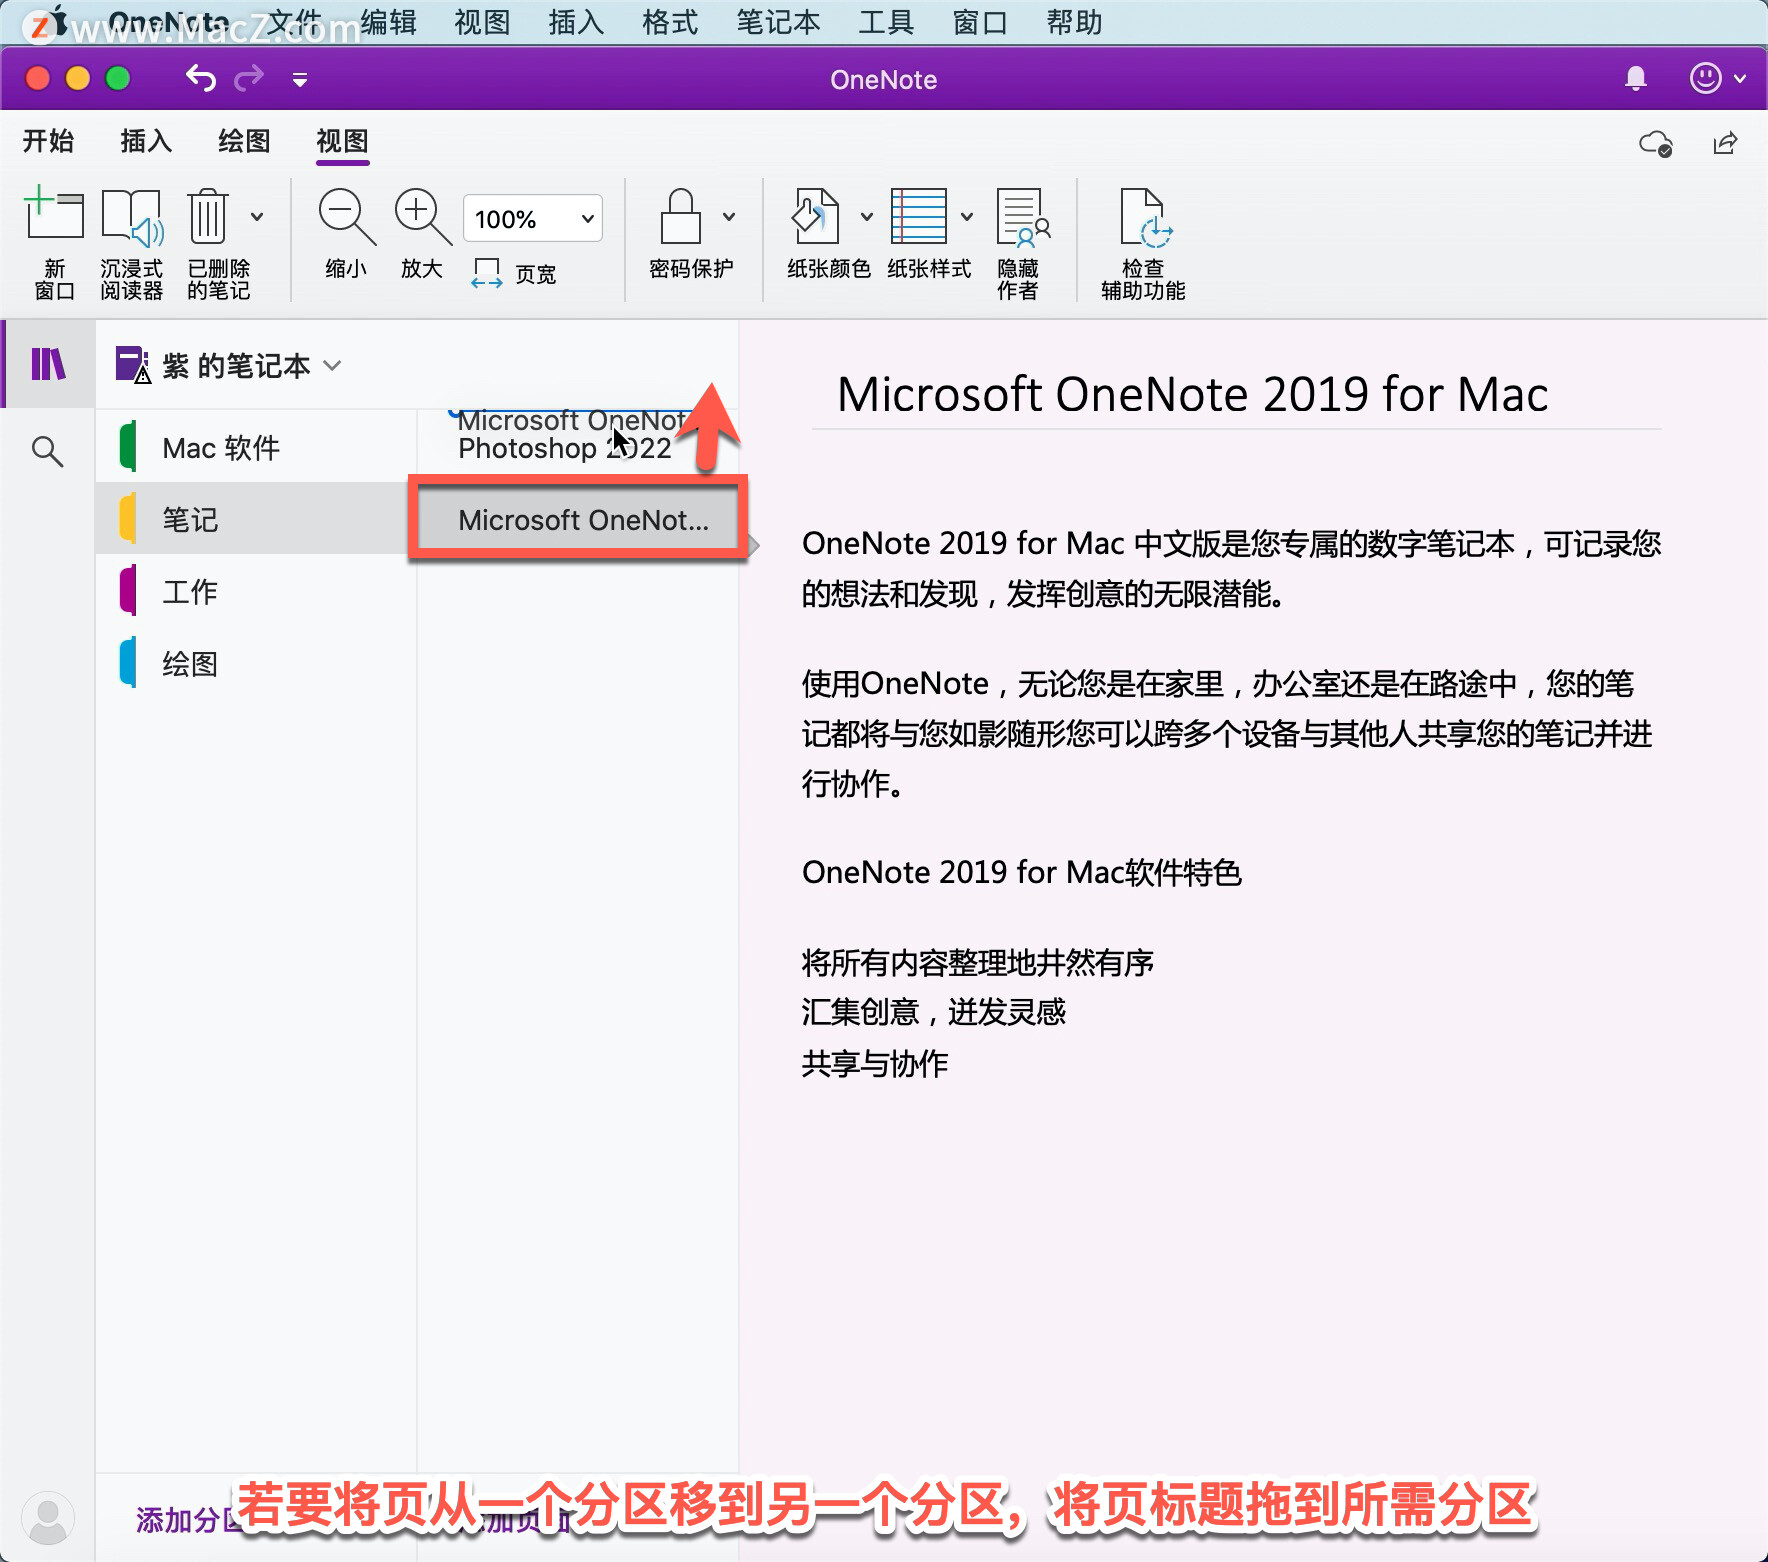 OneNote tutorial, how to organize notebooks in OneNote?